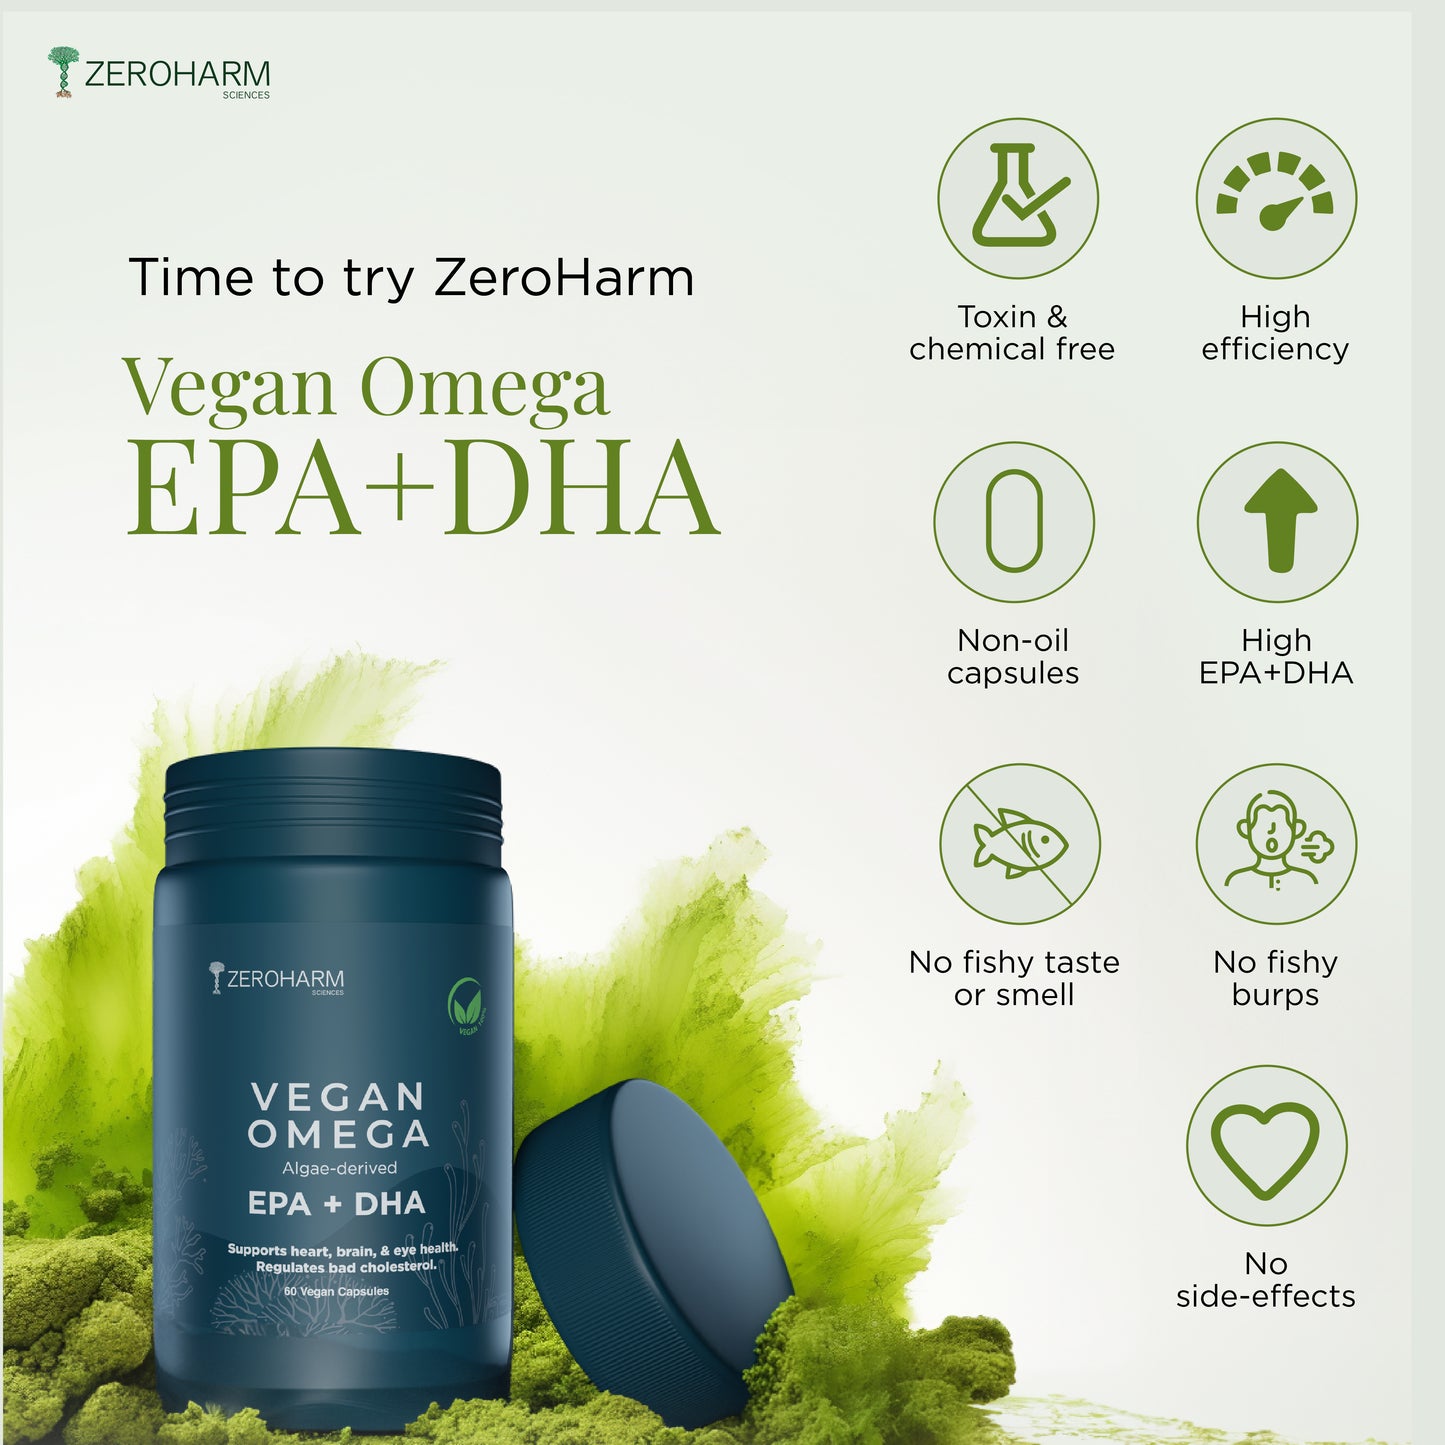 epa and dha capsules made with non oil capsules